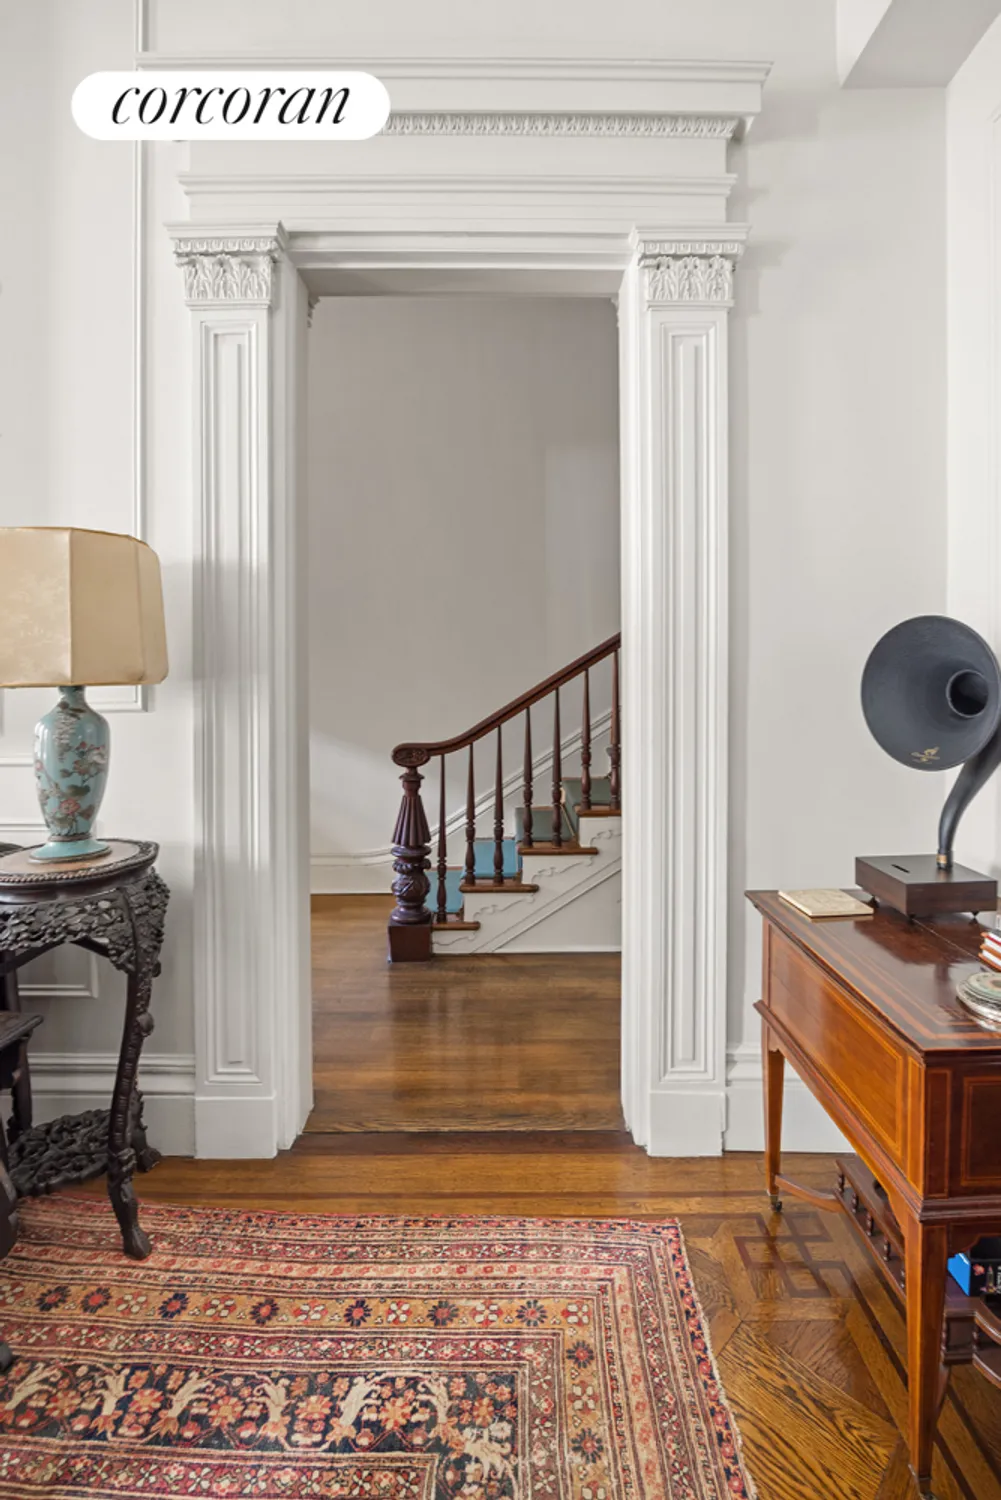 view from parlor to stair with newel post